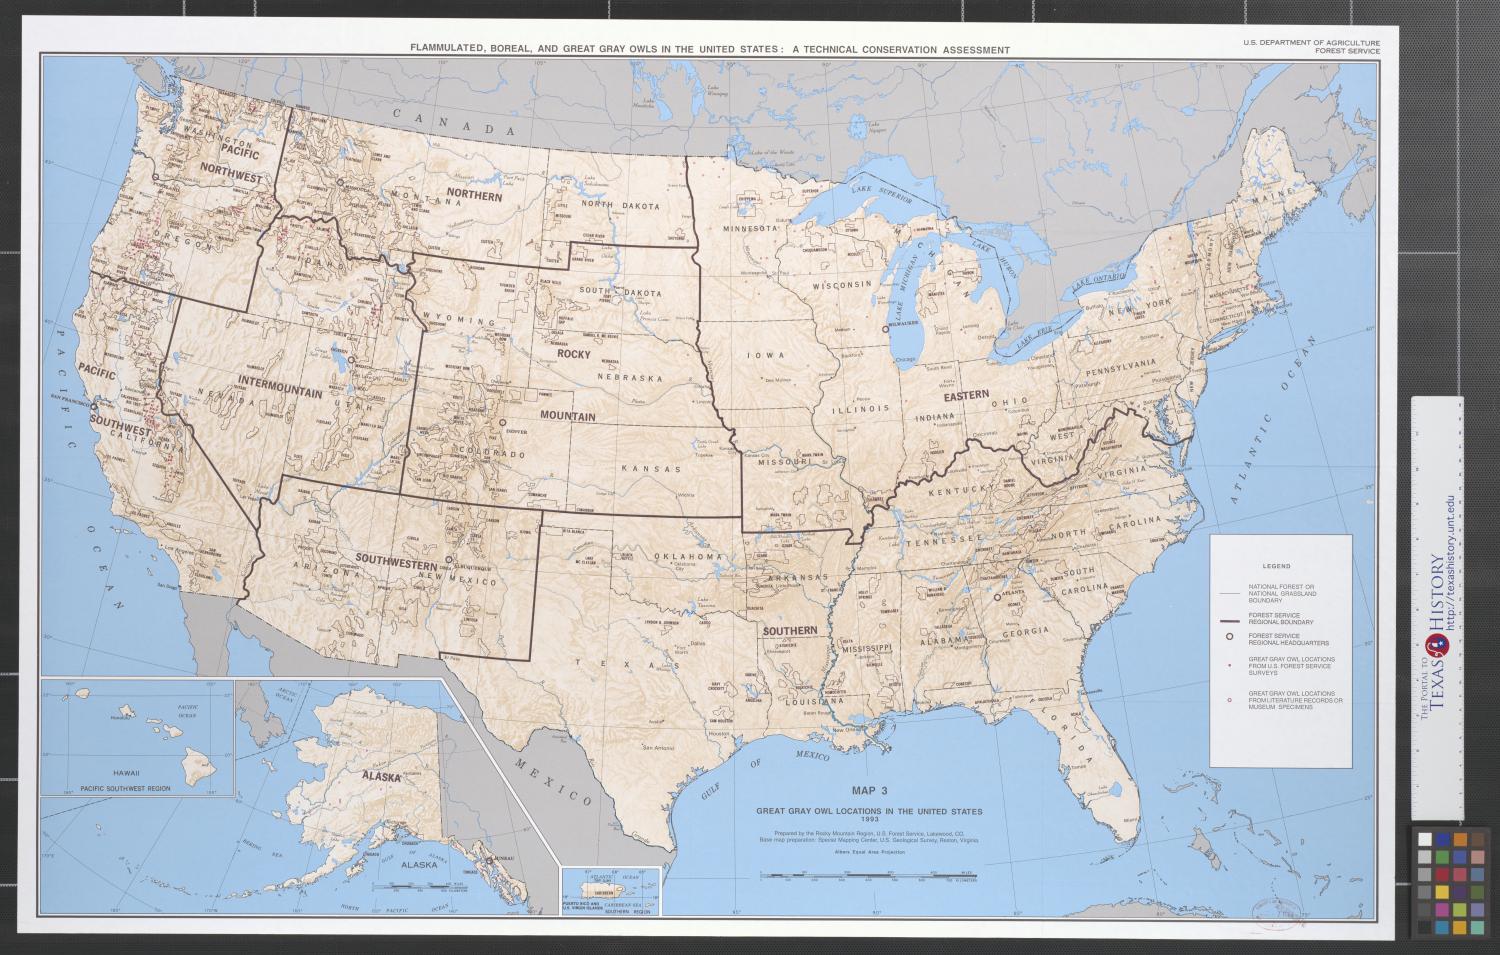 Great gray owl locations in the United States, 1993.
                                                
                                                    [Sequence #]: 1 of 2
                                                